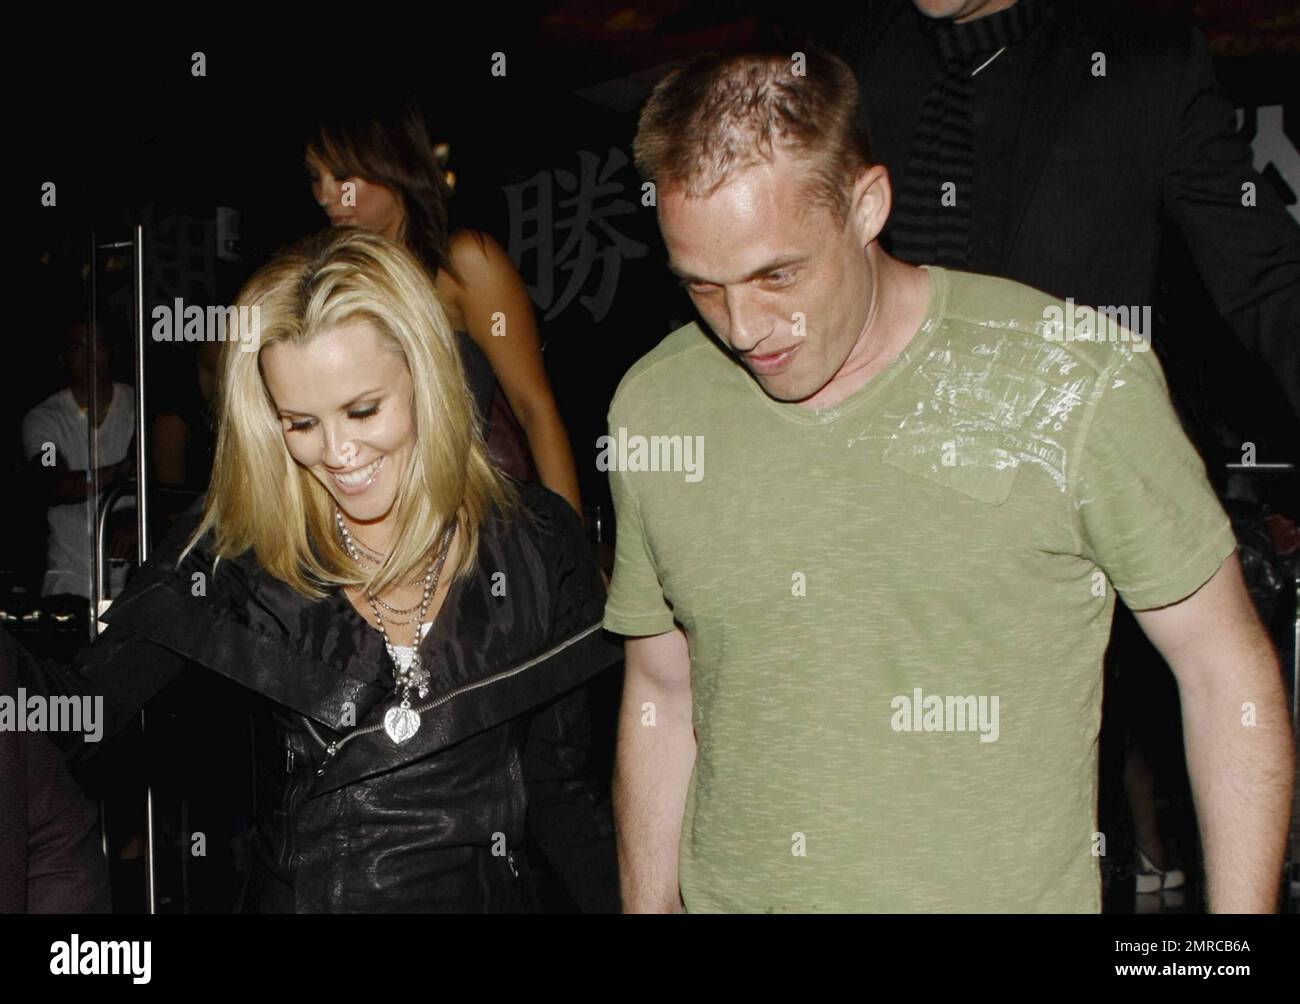 Jenny McCarthy holds hands with a new boyfriend as they leave Katsuya restaurant after dinner.  The former Playboy playmate recently split from long-time boyfriend Jim Carrey and has since been reportedly seen on dates with different men. McCarthy, who has an eight-year-old son with ex-husband John Mallory Asher, smiled and looked happy as she left the restaurant.  Since McCarthy and Carrey announced via Carrey's Twitter page that they were breaking up reports suggest that they remain amicable. Los Angeles, CA. 05/14/10.   . Stock Photo